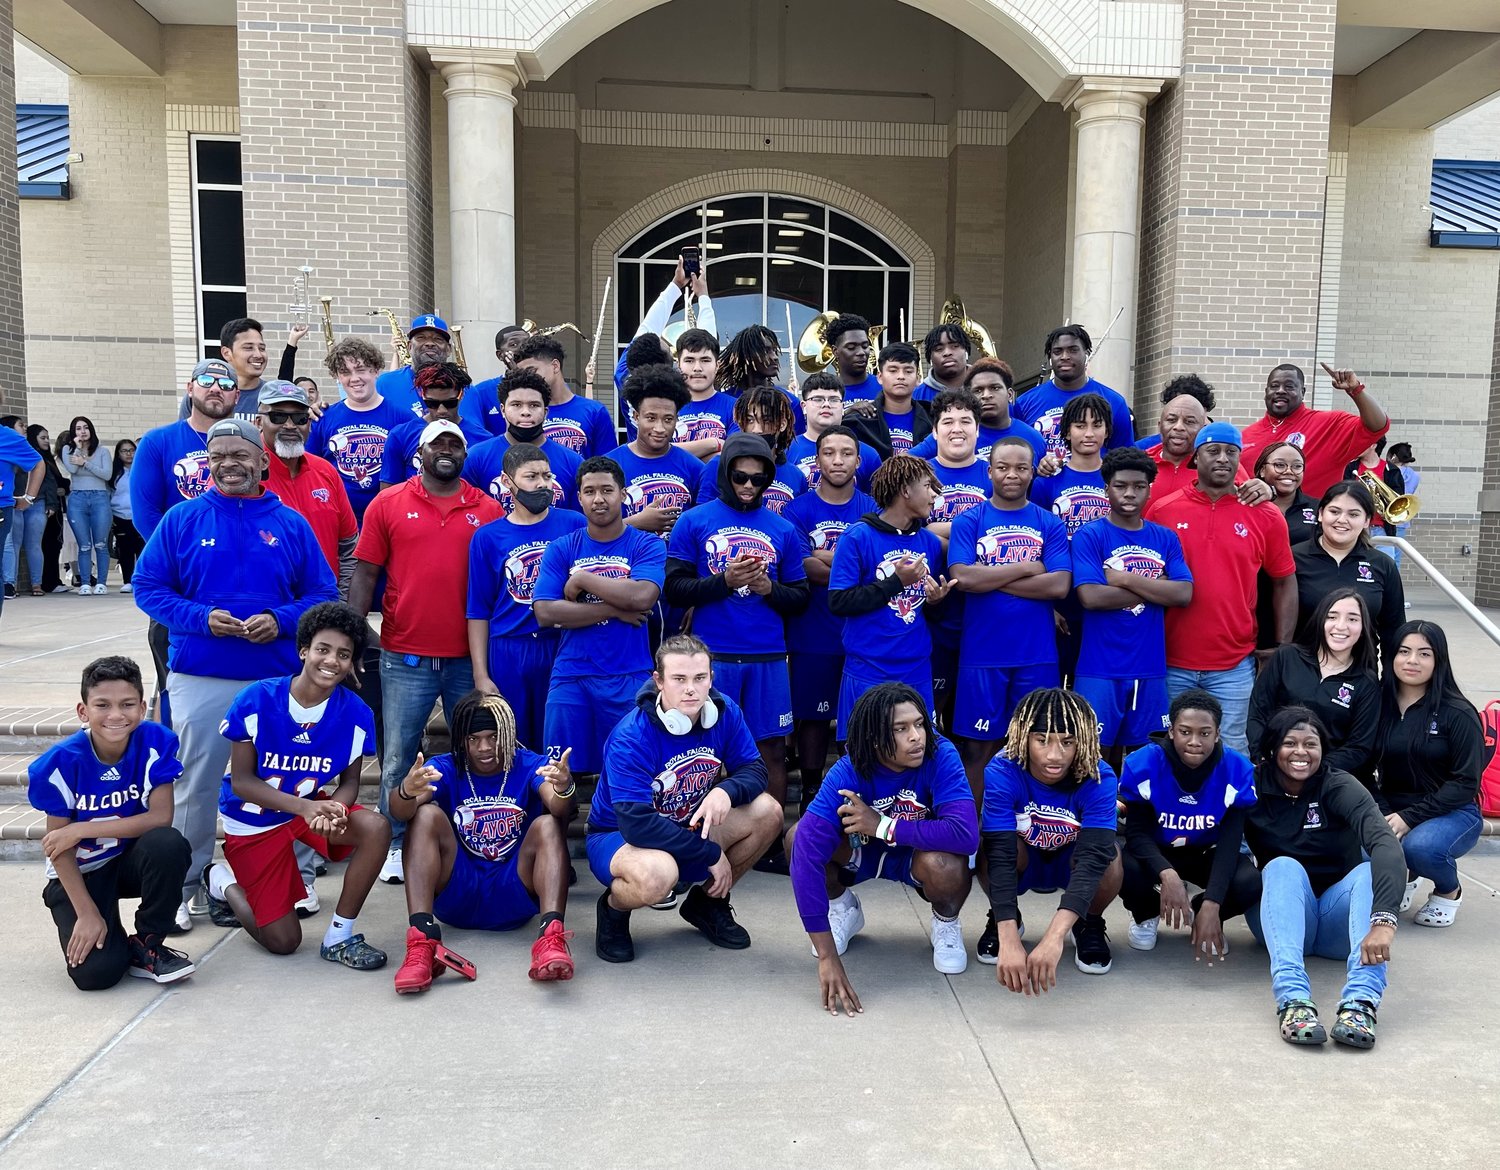 Royal High School held a send-off rally for its Falcons football team Nov. 11 before it faced Hamshire-Fannett in the Class 4A football playoffs. The Falcons fell to the Longhorns, 40-10, finishing with a 9-2 record.